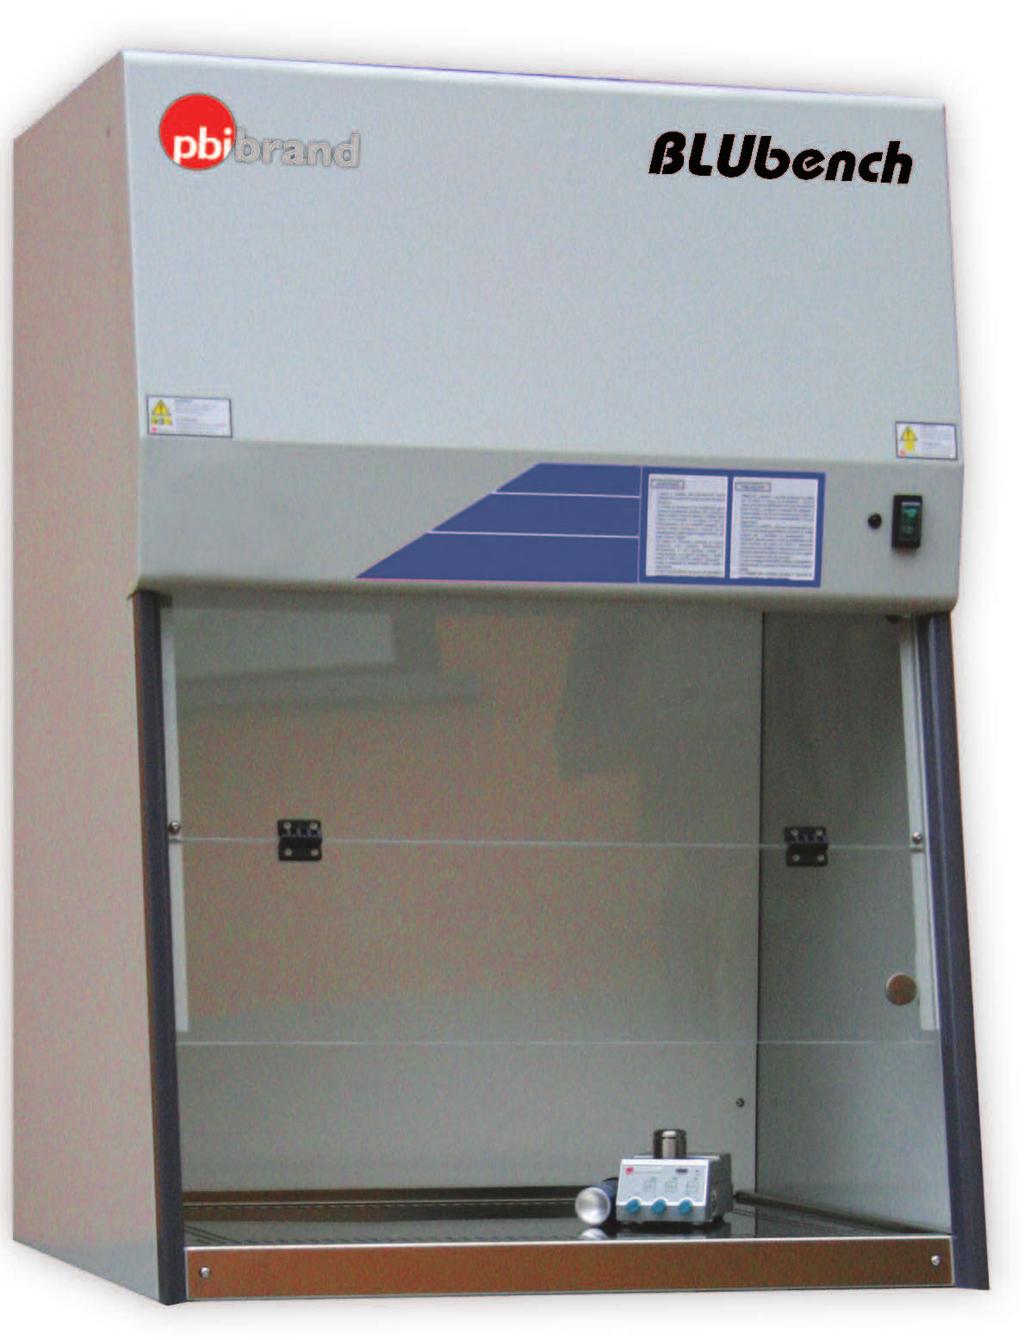 BLUbench - TYPE 80 Plus DUCTLESS FUME CABINET BLUBENCH 80 PLUS - PERSONAL CABINET HINGED FRONT SASH WITH LARGE FRONT OPENING: provide easy access during cabinet loading and easy internal cleaning.